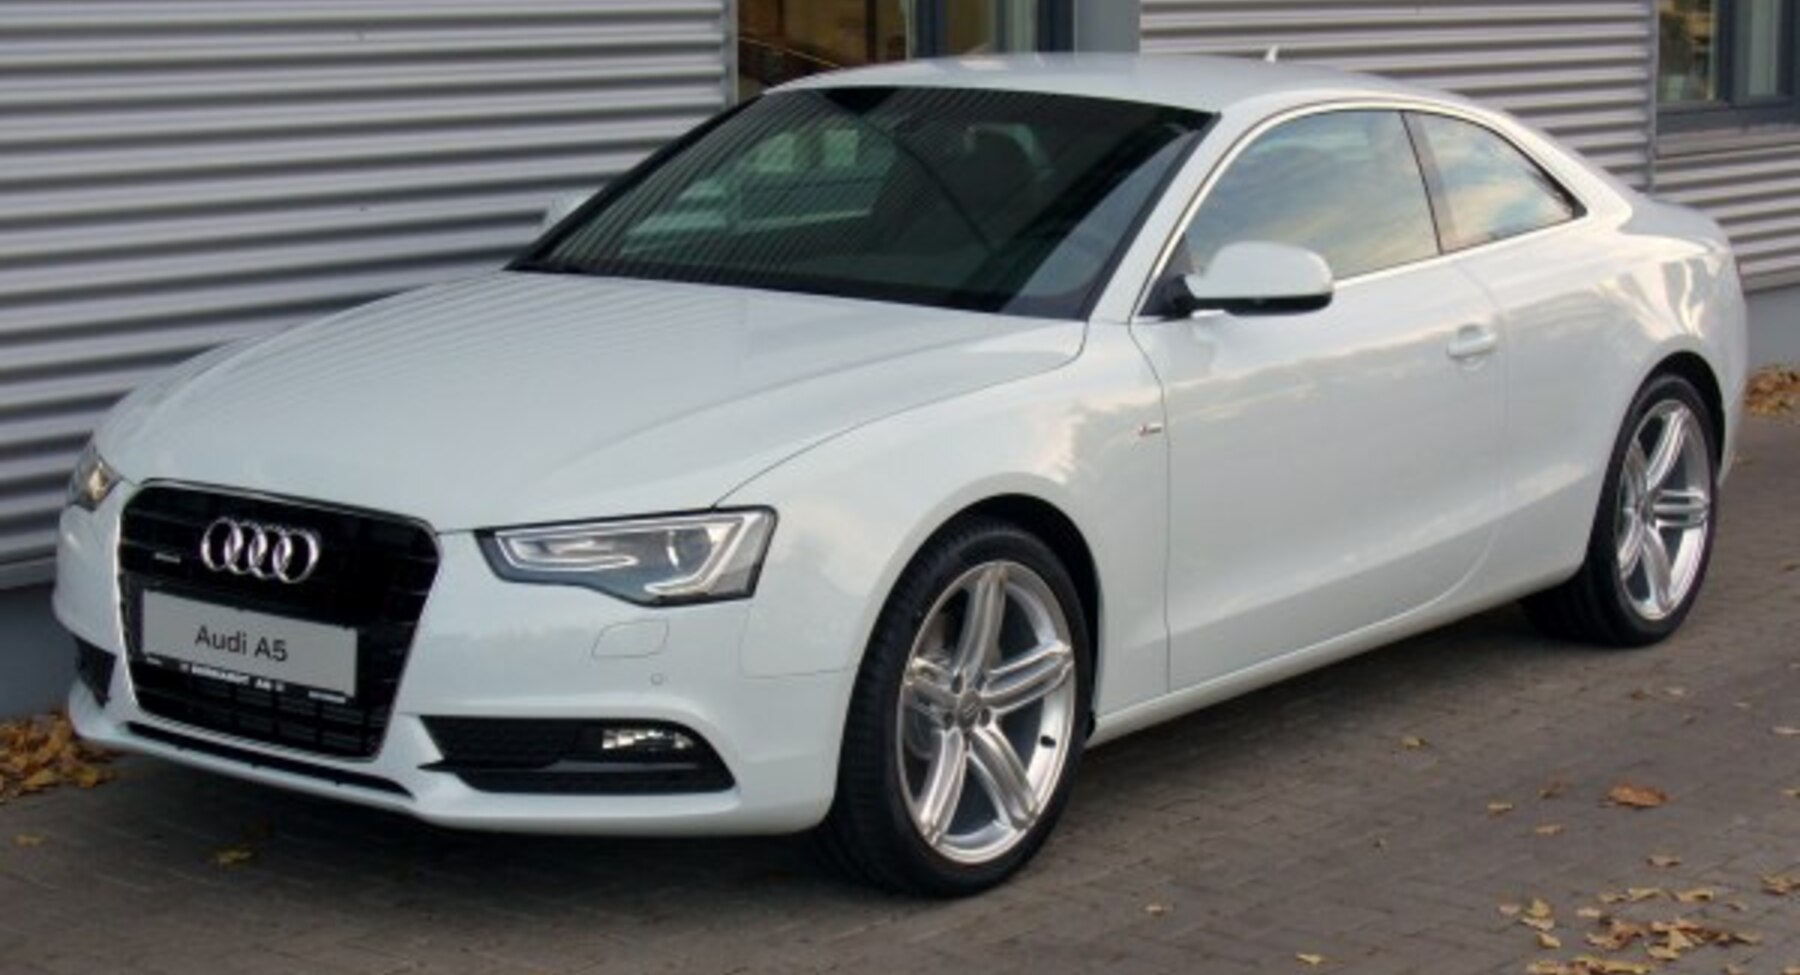 Audi A5 Coupe (8T3, facelift 2011) 2.0 TFSI (230 Hp) quattro S tronic 2015, 2016 